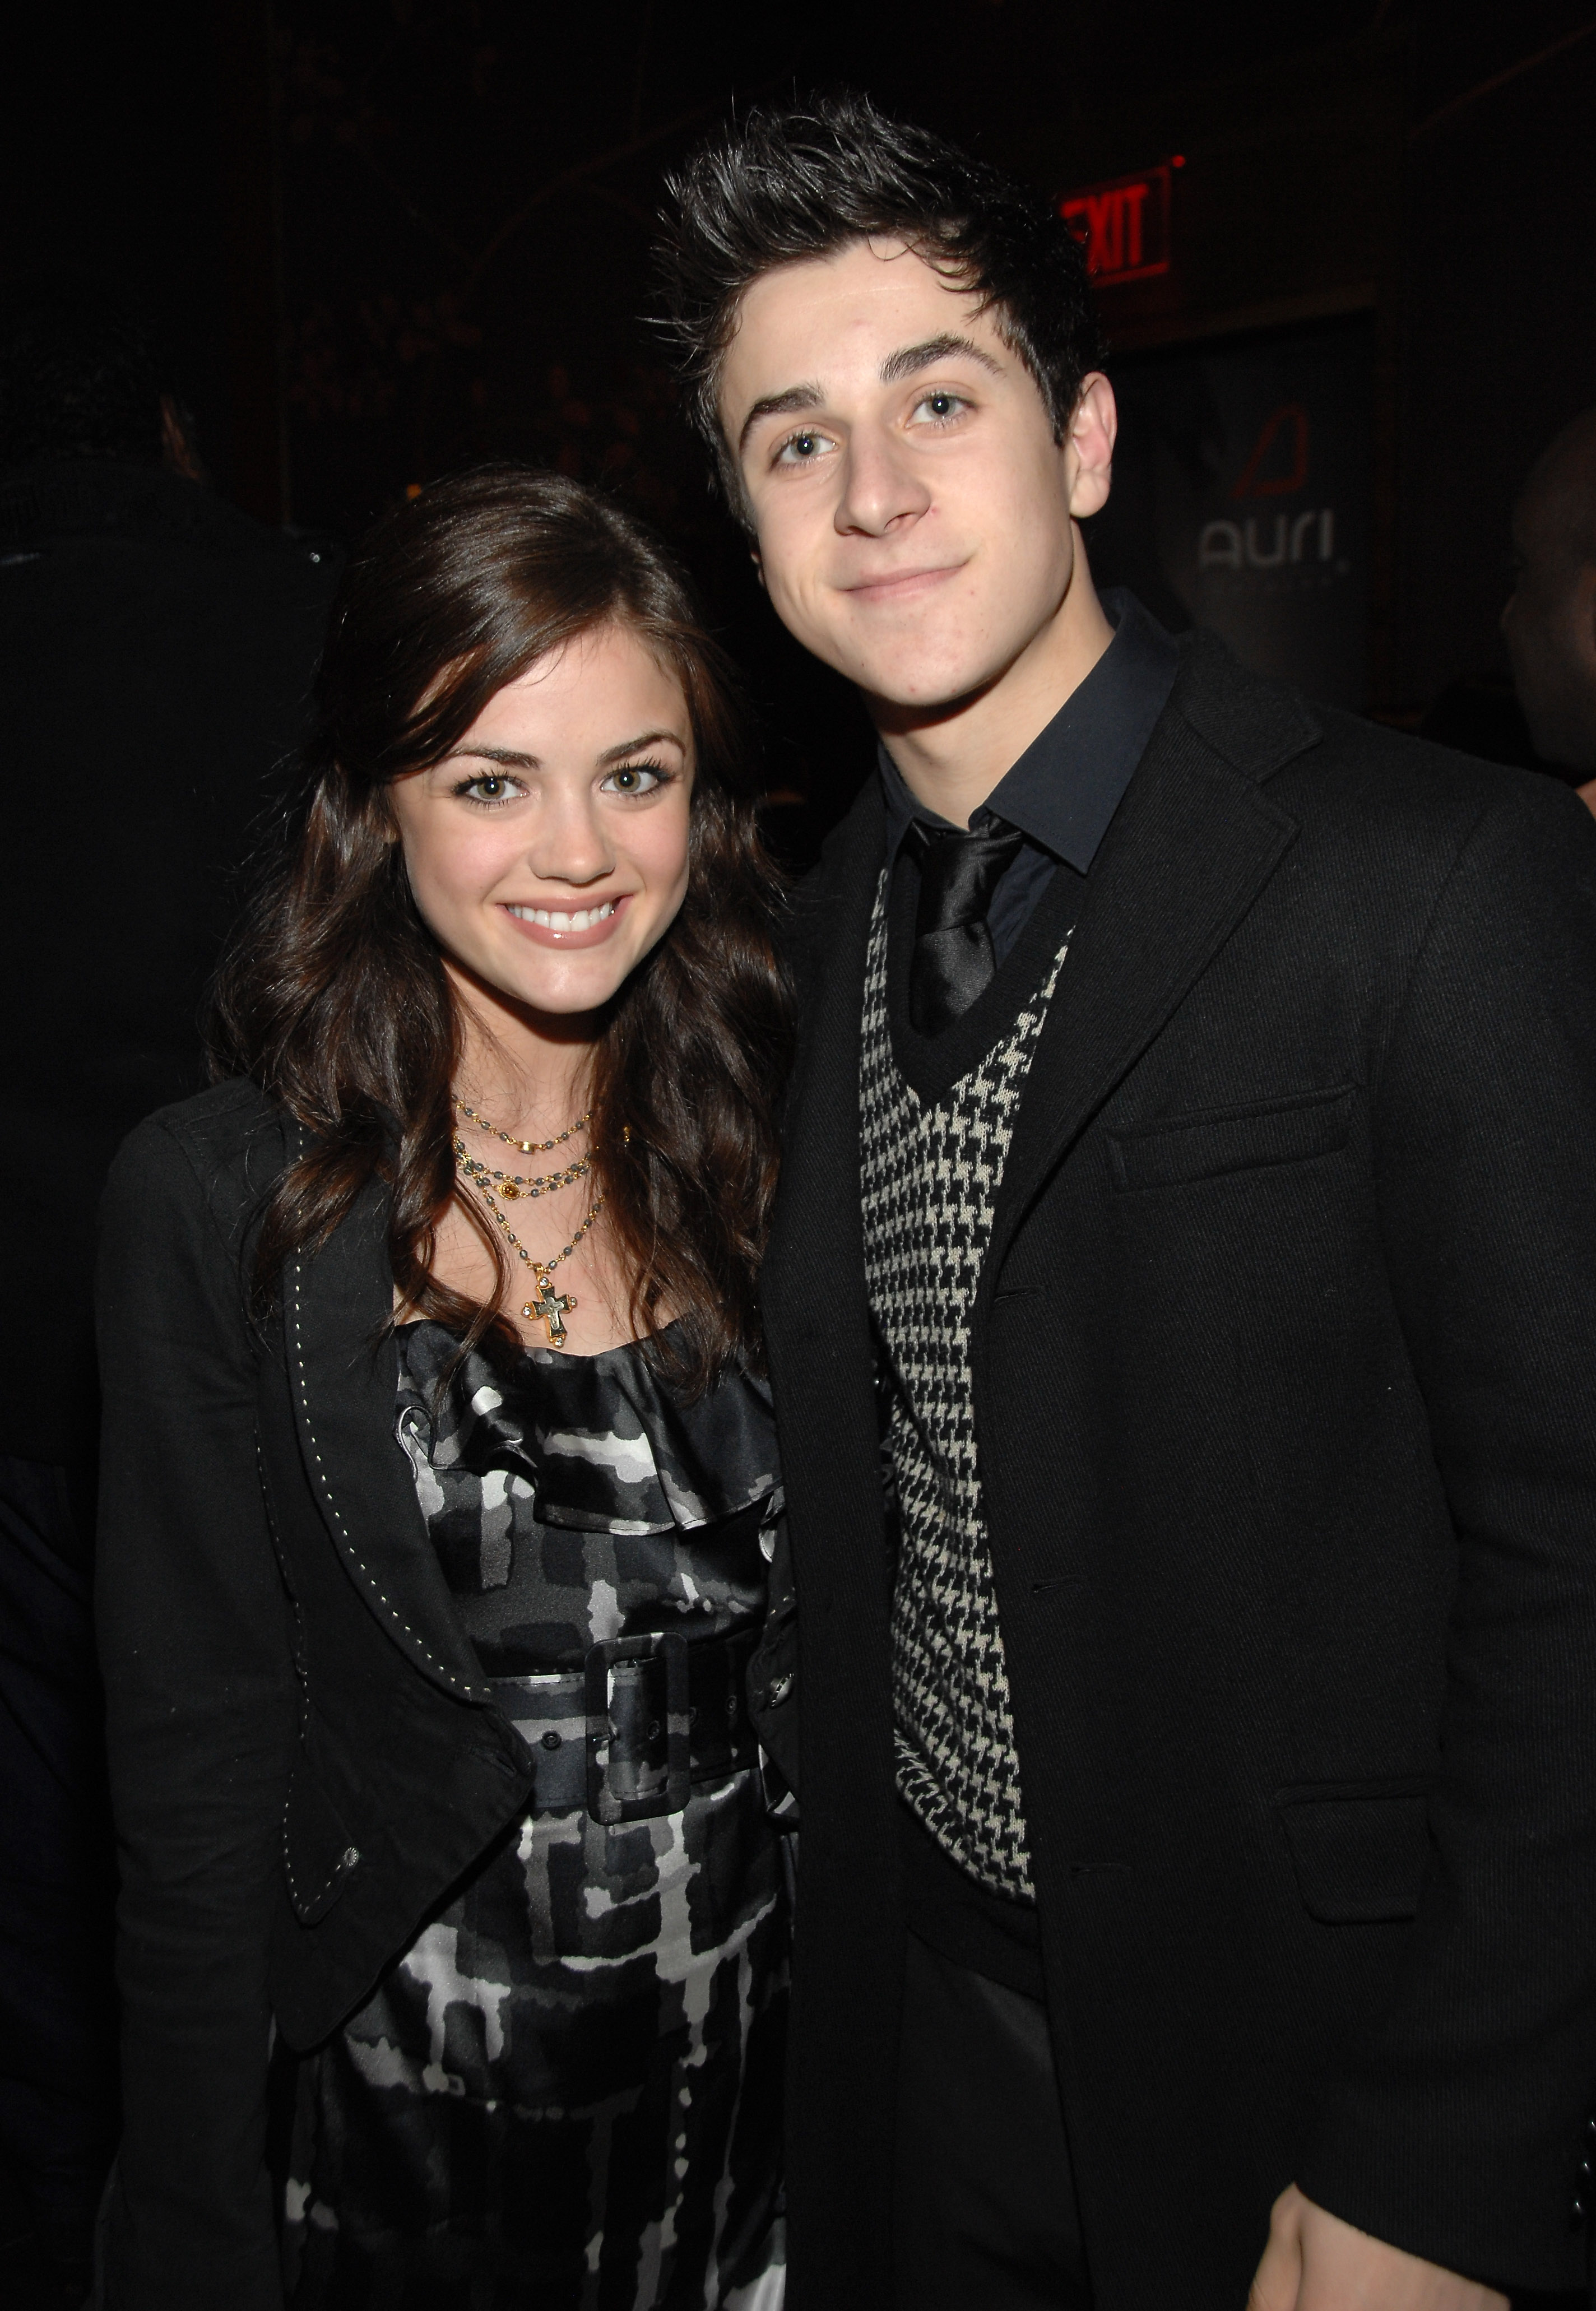 Lucy Hale and David Henrie at Stars For a Cause at the Hollywood Foreign Press Association Salute To Young Hollywood Party on December 17, 2008, in Los Angeles